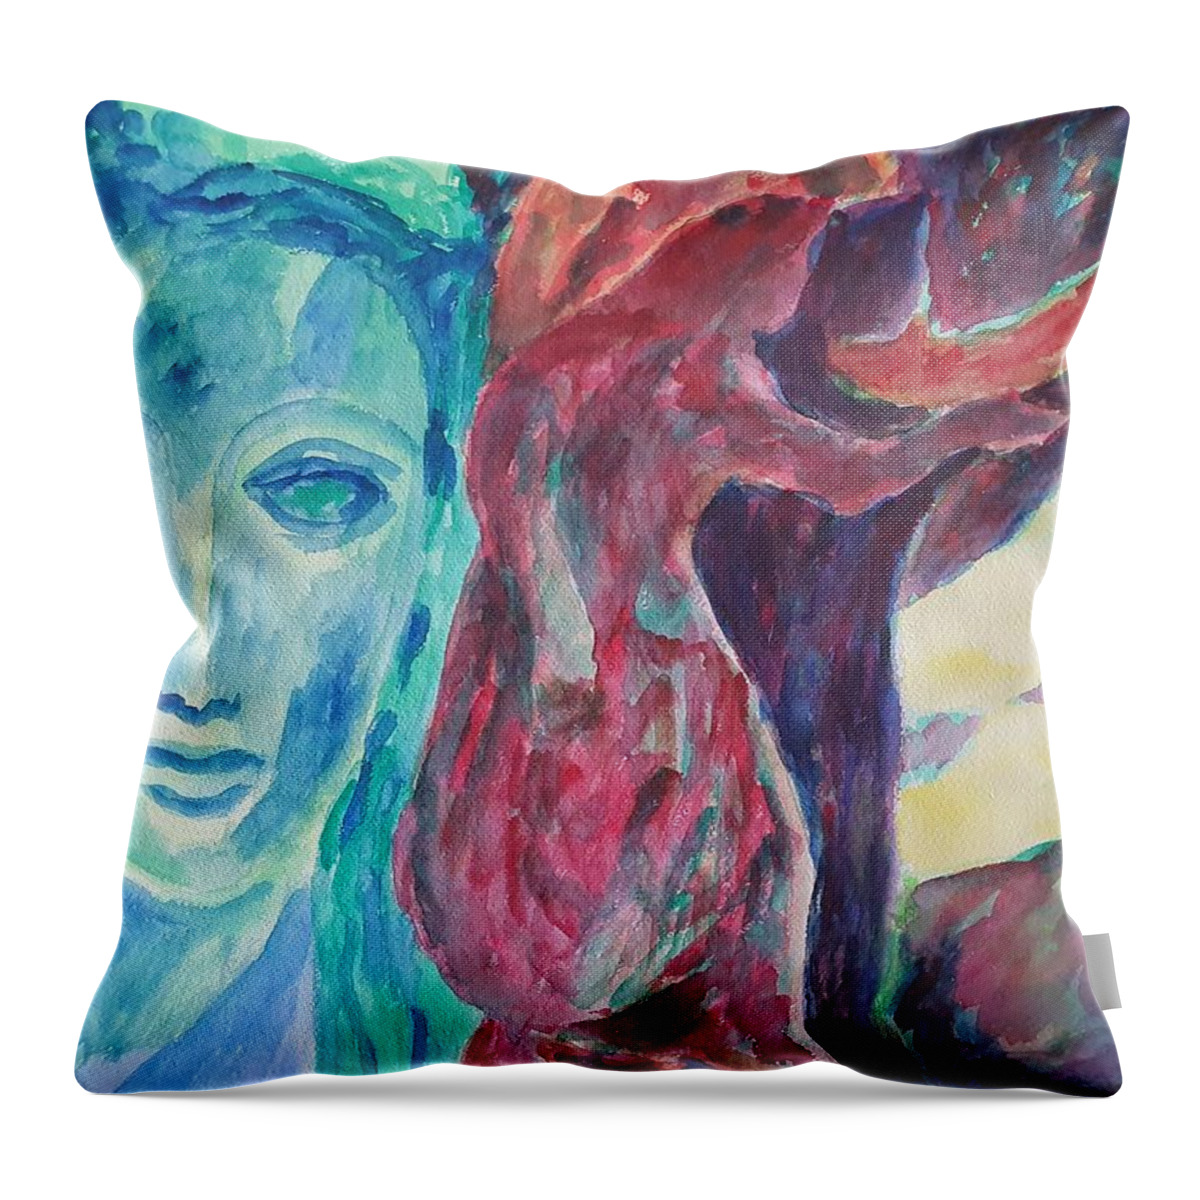 Masterpiece Paintings Throw Pillow featuring the painting Spinning Destiny by Enrico Garff